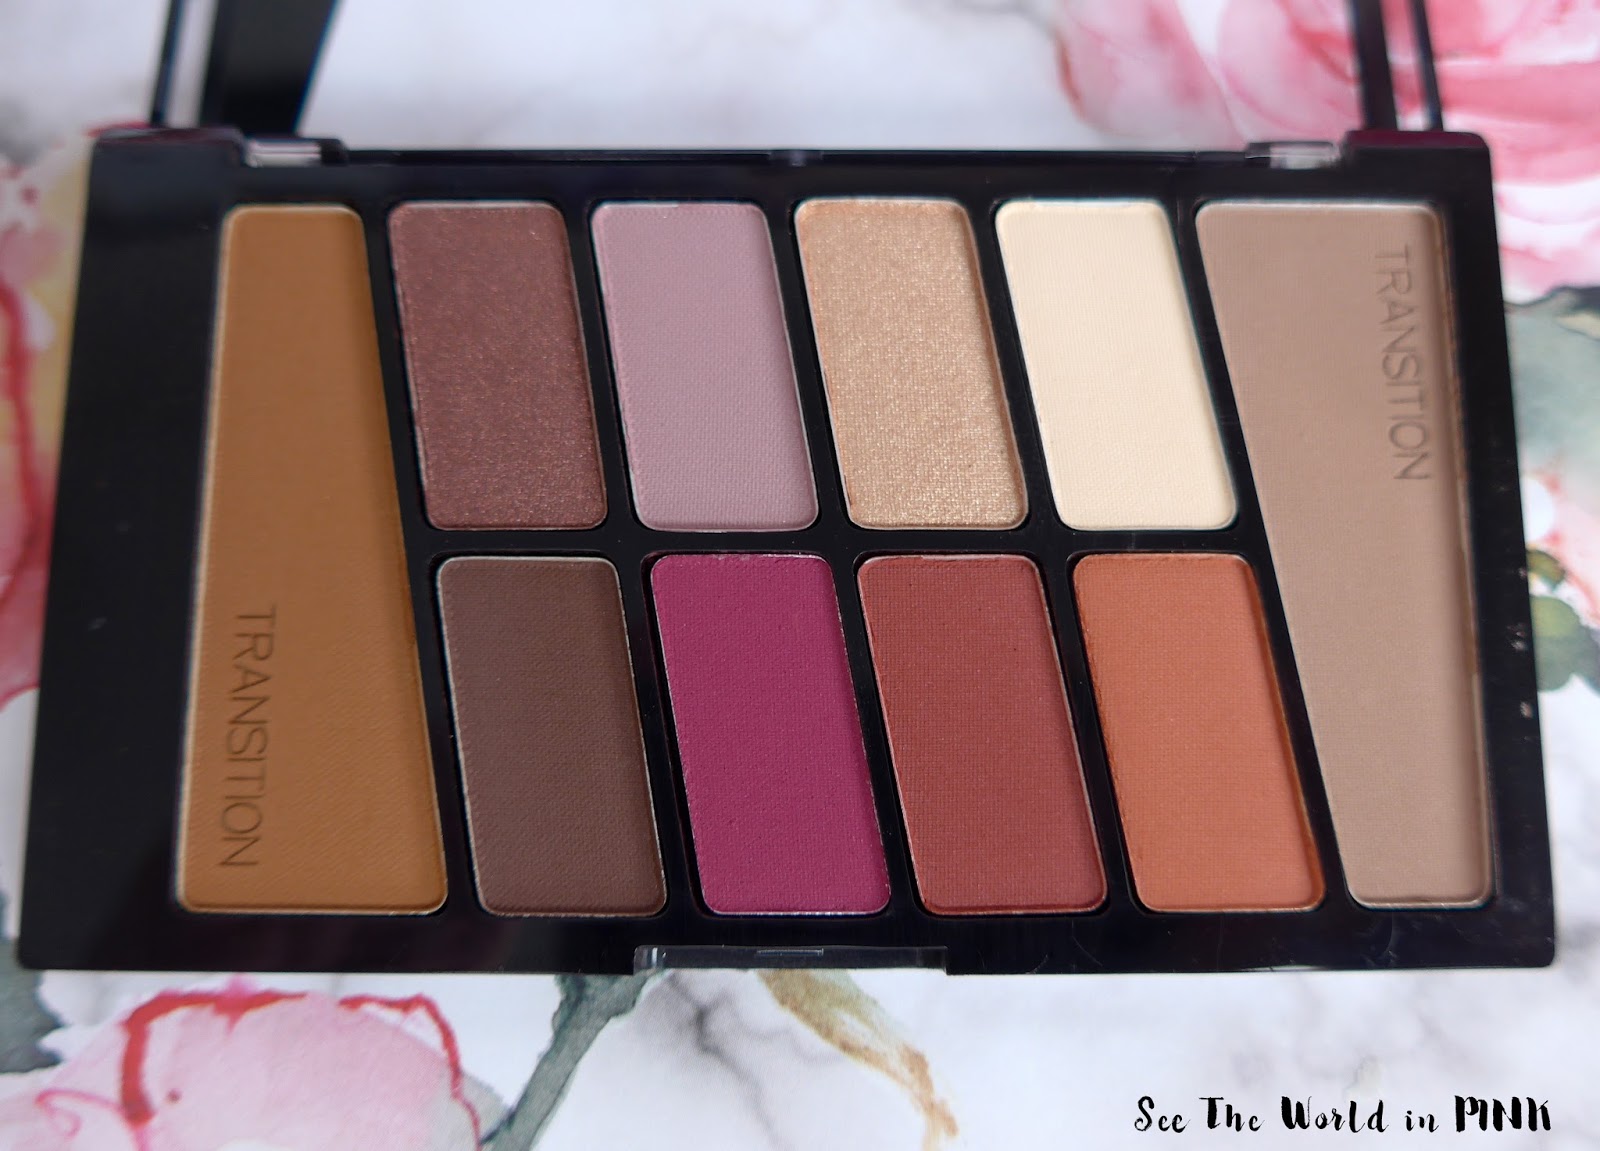 Wet n Wild Rose in the Air Color Icon Eyeshadow 10 Pan Palette - Swatches, Makeup Look and Review! 